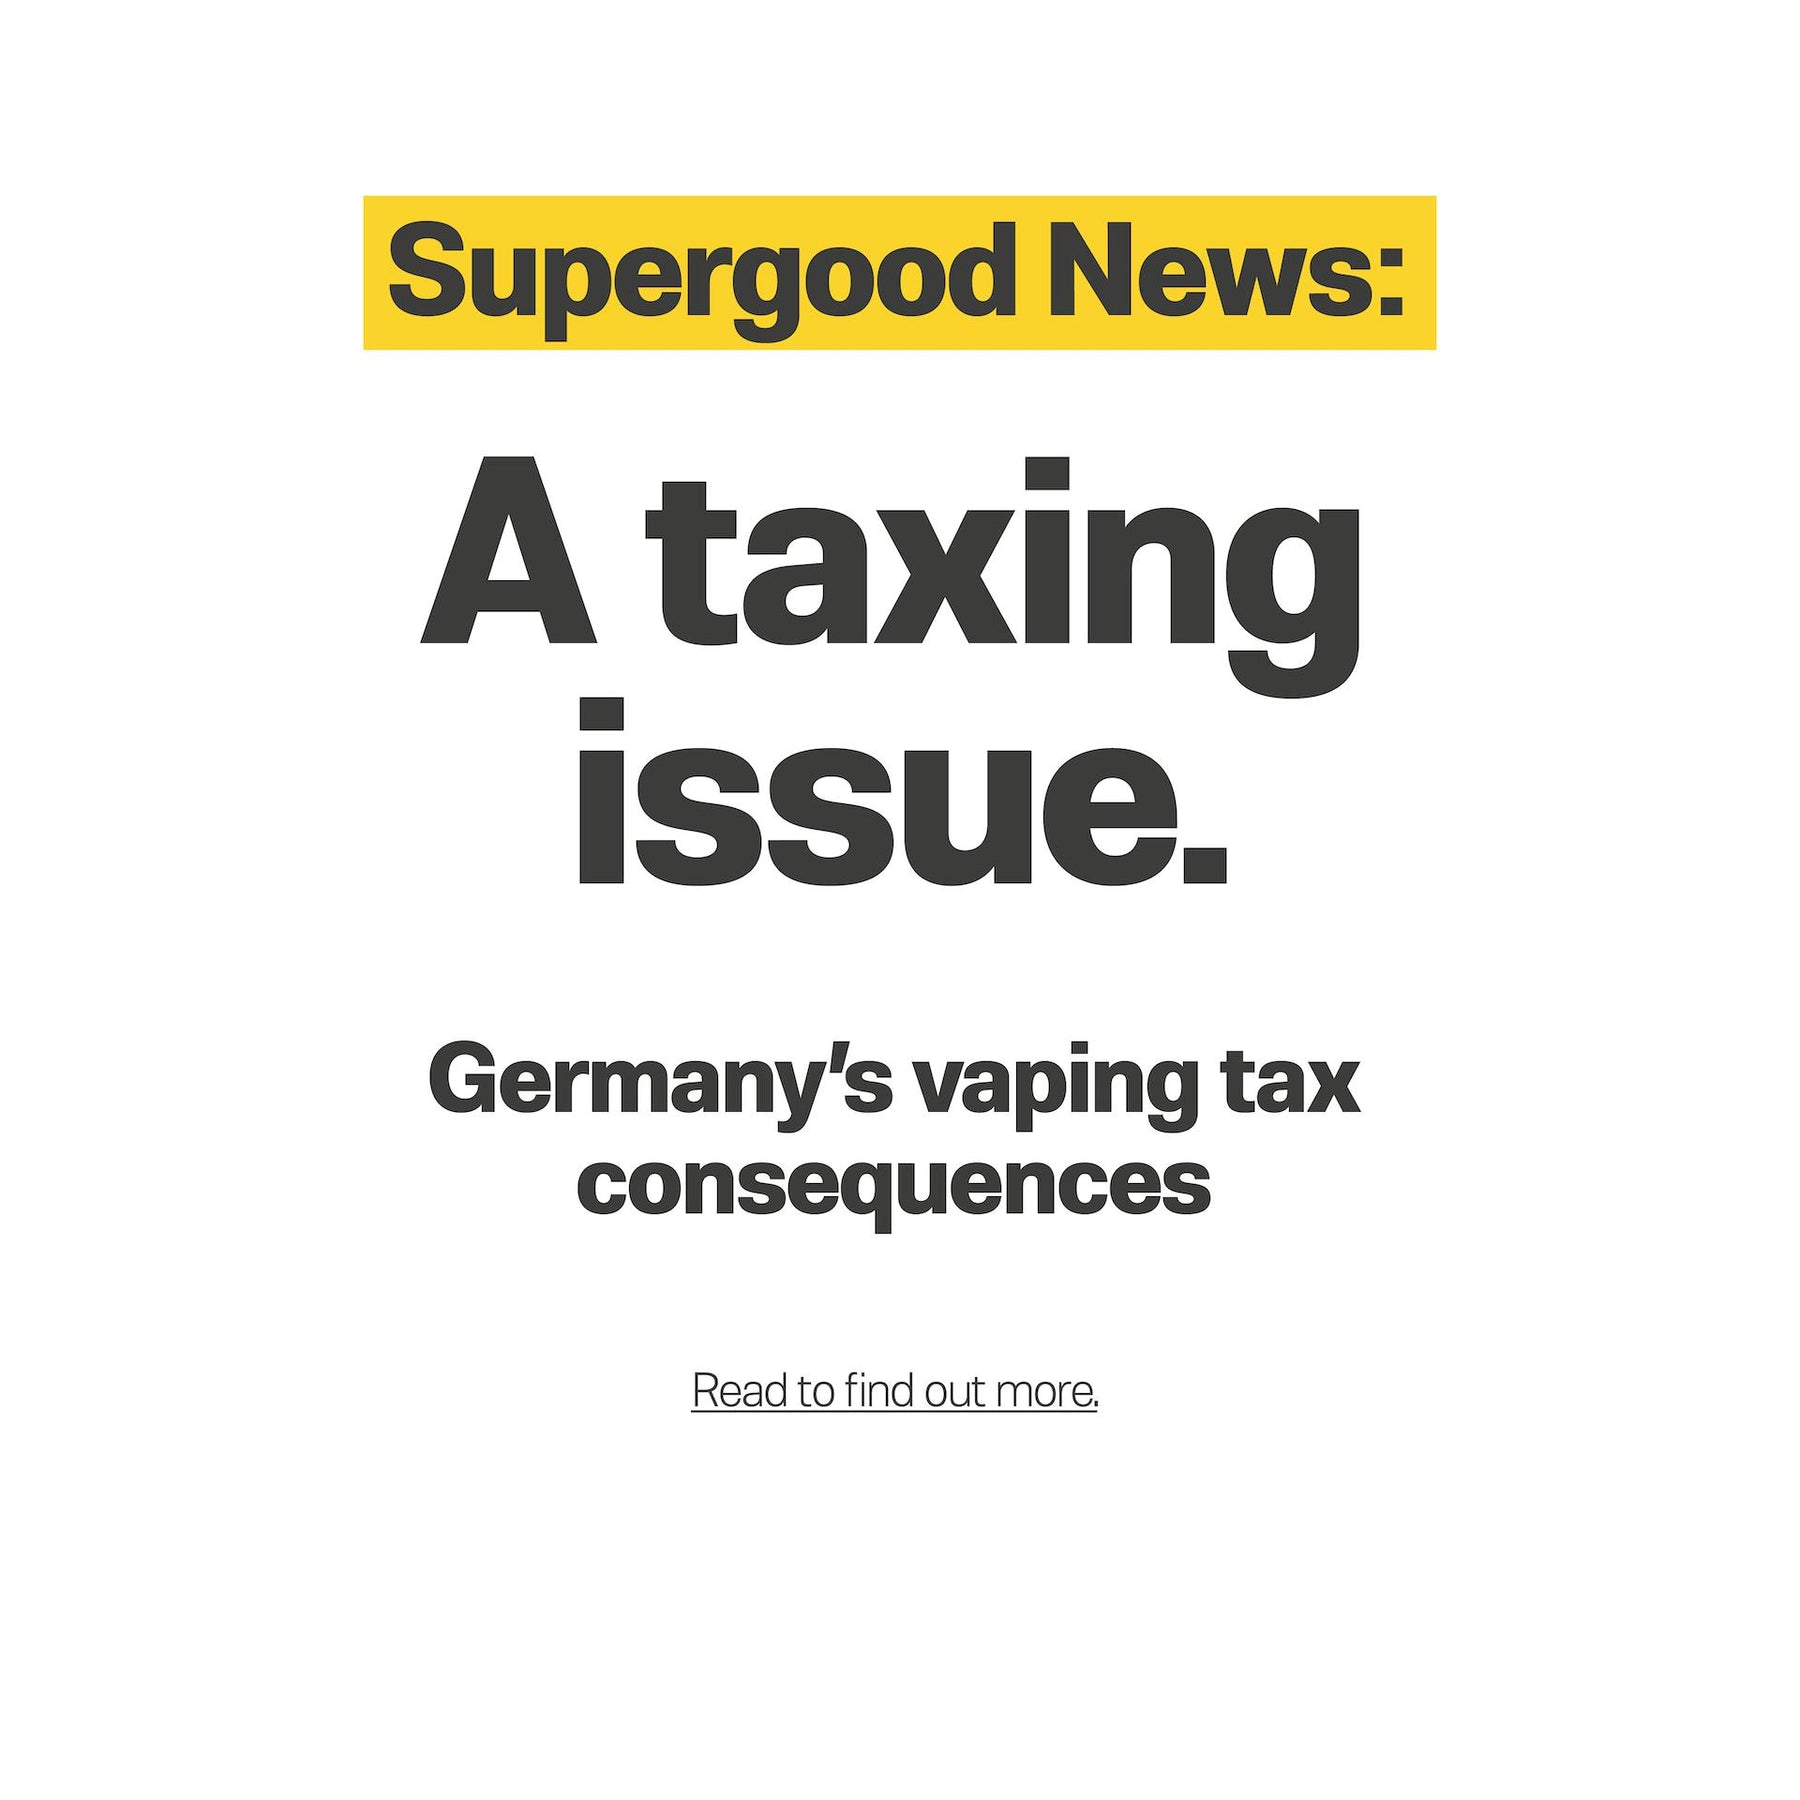 Germany’s vaping tax consequences.